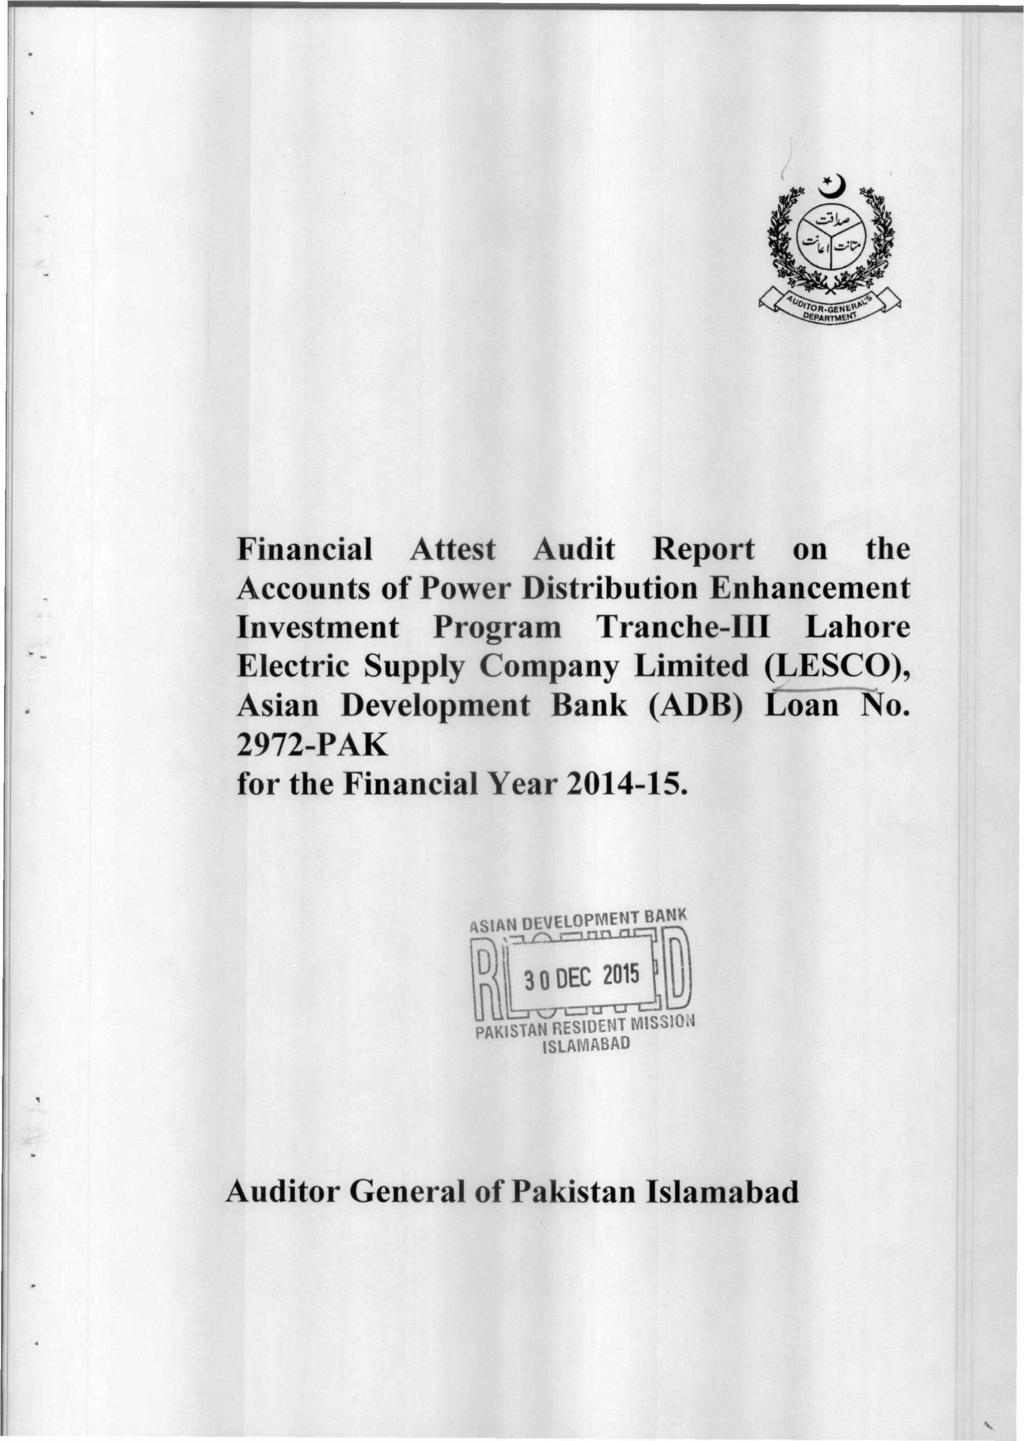 4649. 06-PArrnAve Financial Attest Audit Report on the Accounts of Power Distribution Enhancement Investment Program Tranche-III Lahore Electric Supply Company Limited (LESCO), Asian